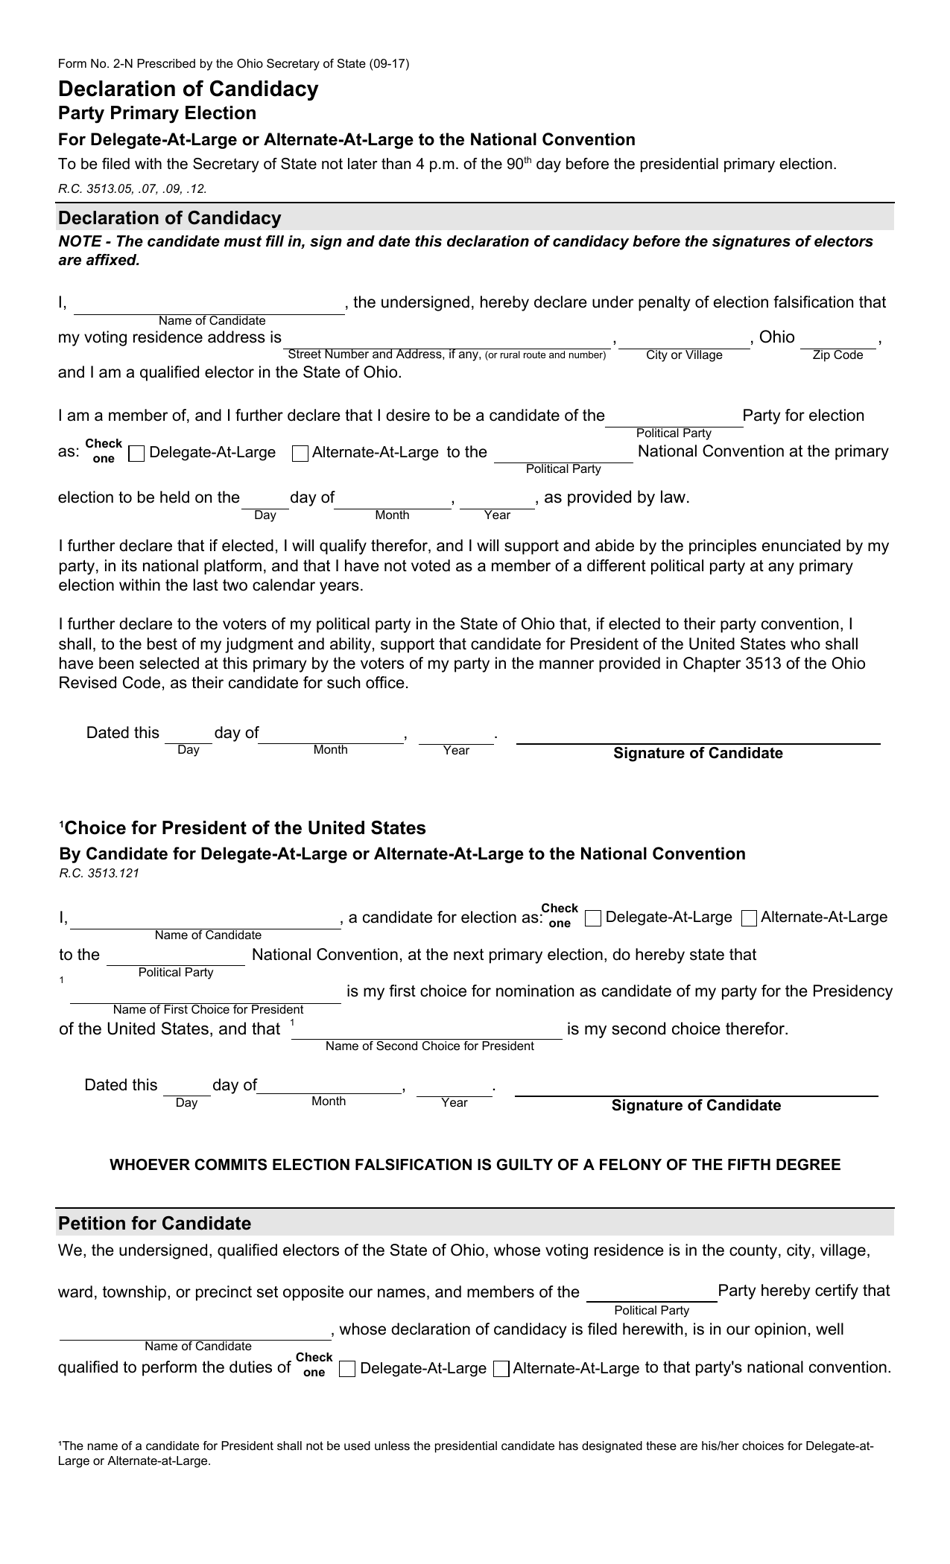 Form 2-N Declaration of Candidacy - Party Primary - at-Large Delegate / Alternate to the National Convention (Traditional) - Ohio, Page 1